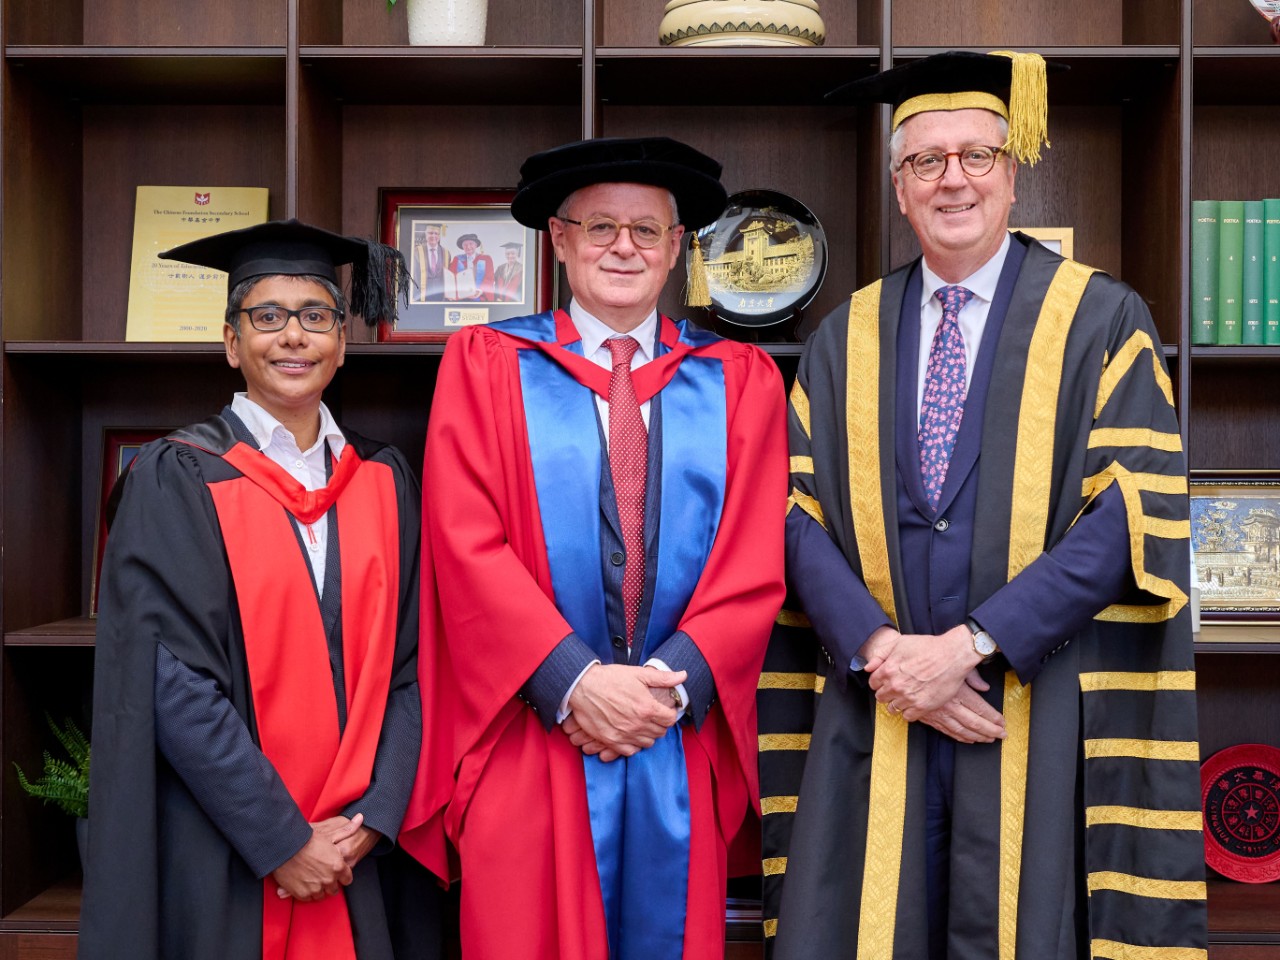 Three people in academic regalia in front of a shelf